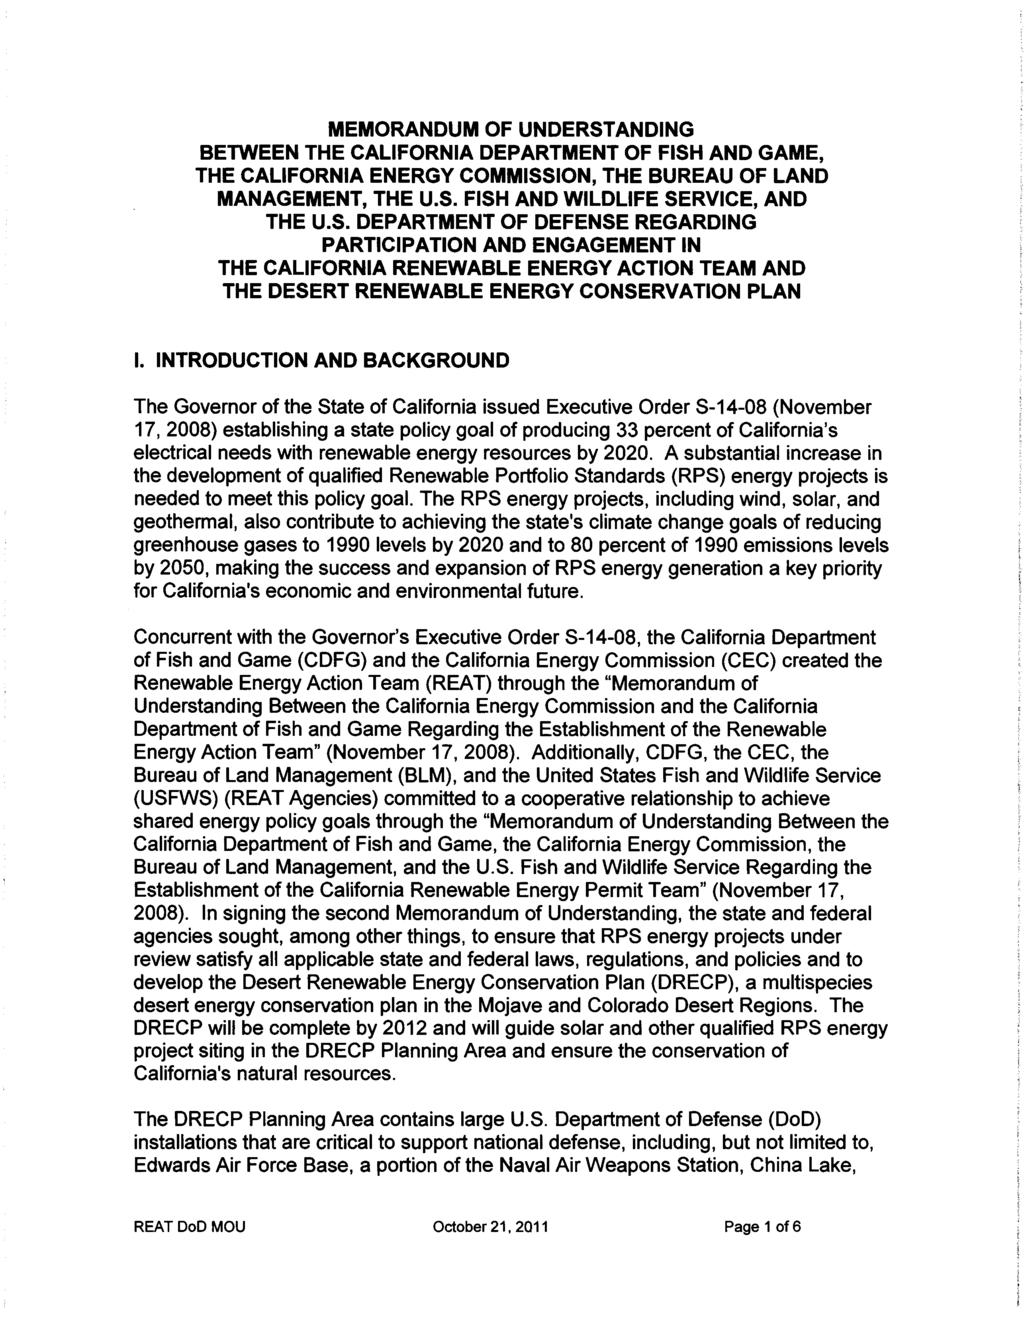 MEMORANDUM OF UNDERSTANDING BETWEEN THE CALIFORNIA DEPARTMENT OF FISH AND GAME, THE CALIFORNIA ENERGY COMMISSION, THE BUREAU OF LAND MANAGEMENT, THE U.S. FISH AND WILDLIFE SERVICE, AND THE U.S. DEPARTMENT OF DEFENSE REGARDING PARTICIPATION AND ENGAGEMENT IN THE CALIFORNIA RENEWABLE ENERGY ACTION TEAM AND THE DESERT RENEWABLE ENERGY CONSERVATION PLAN I.